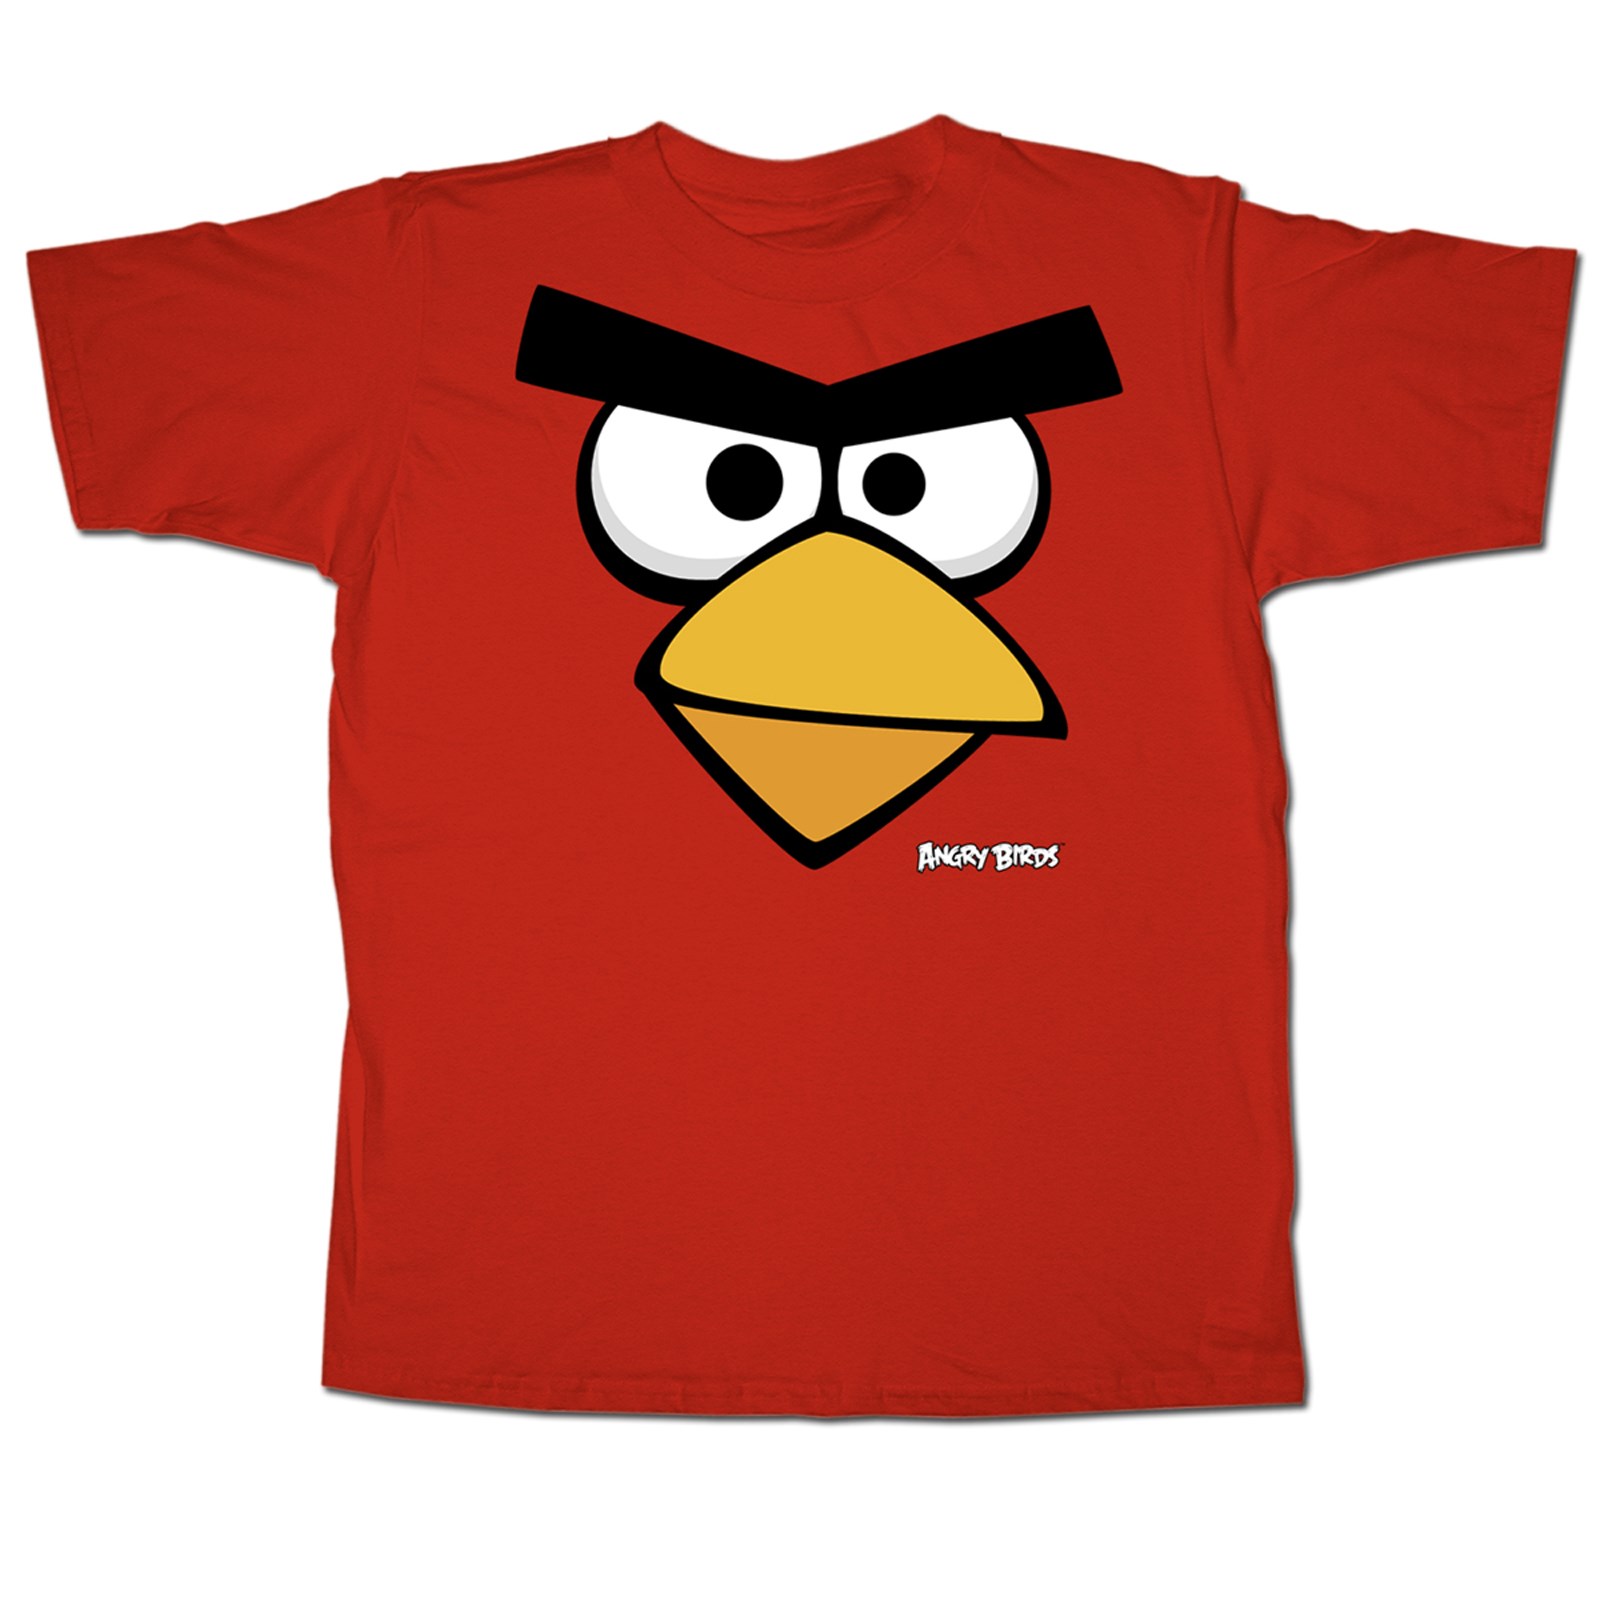 Red Angry Birds T-Shirt